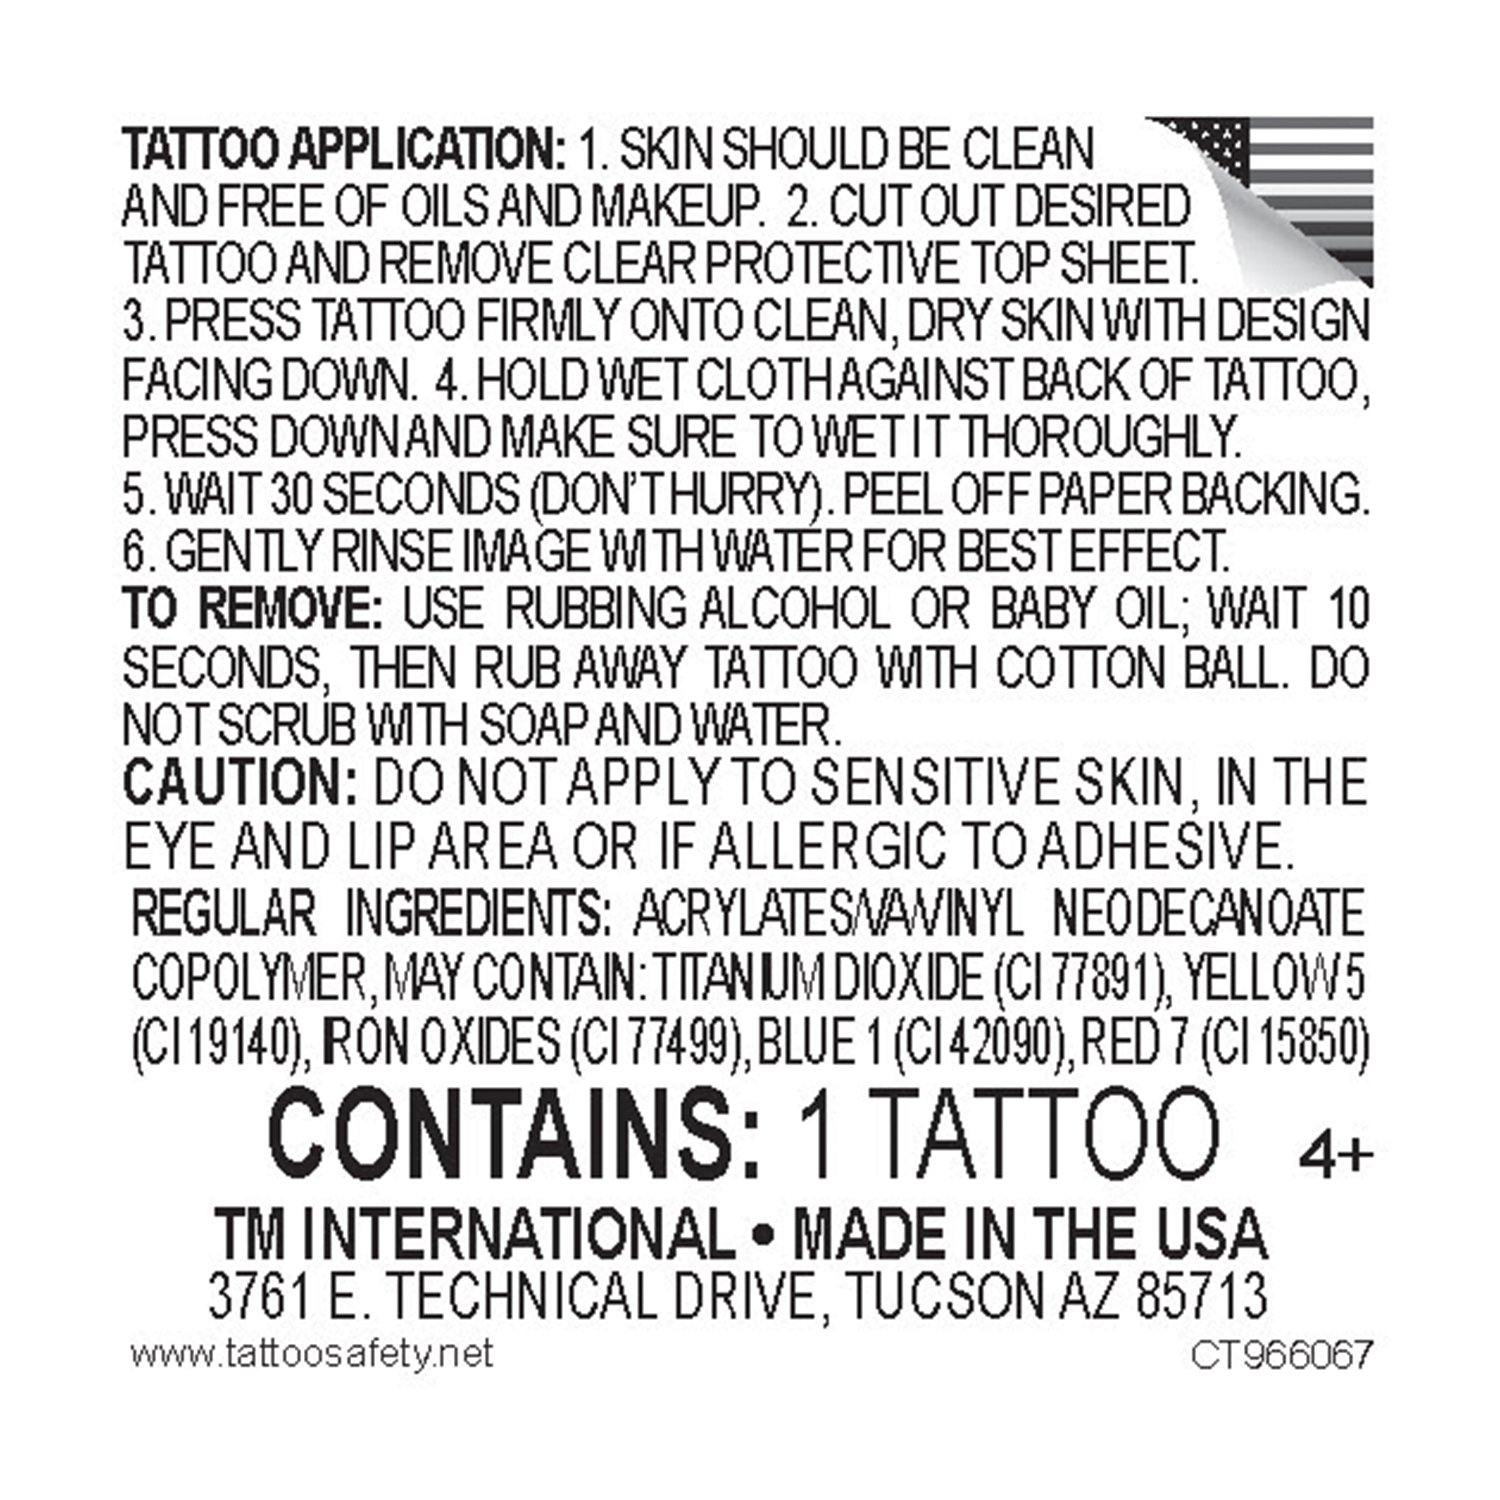 Temp Tattoo Sample Pack #3 - 3 Pairs - Fitzpatrick Colors: 4, 5 and 6 - Restorative Ink Specialists